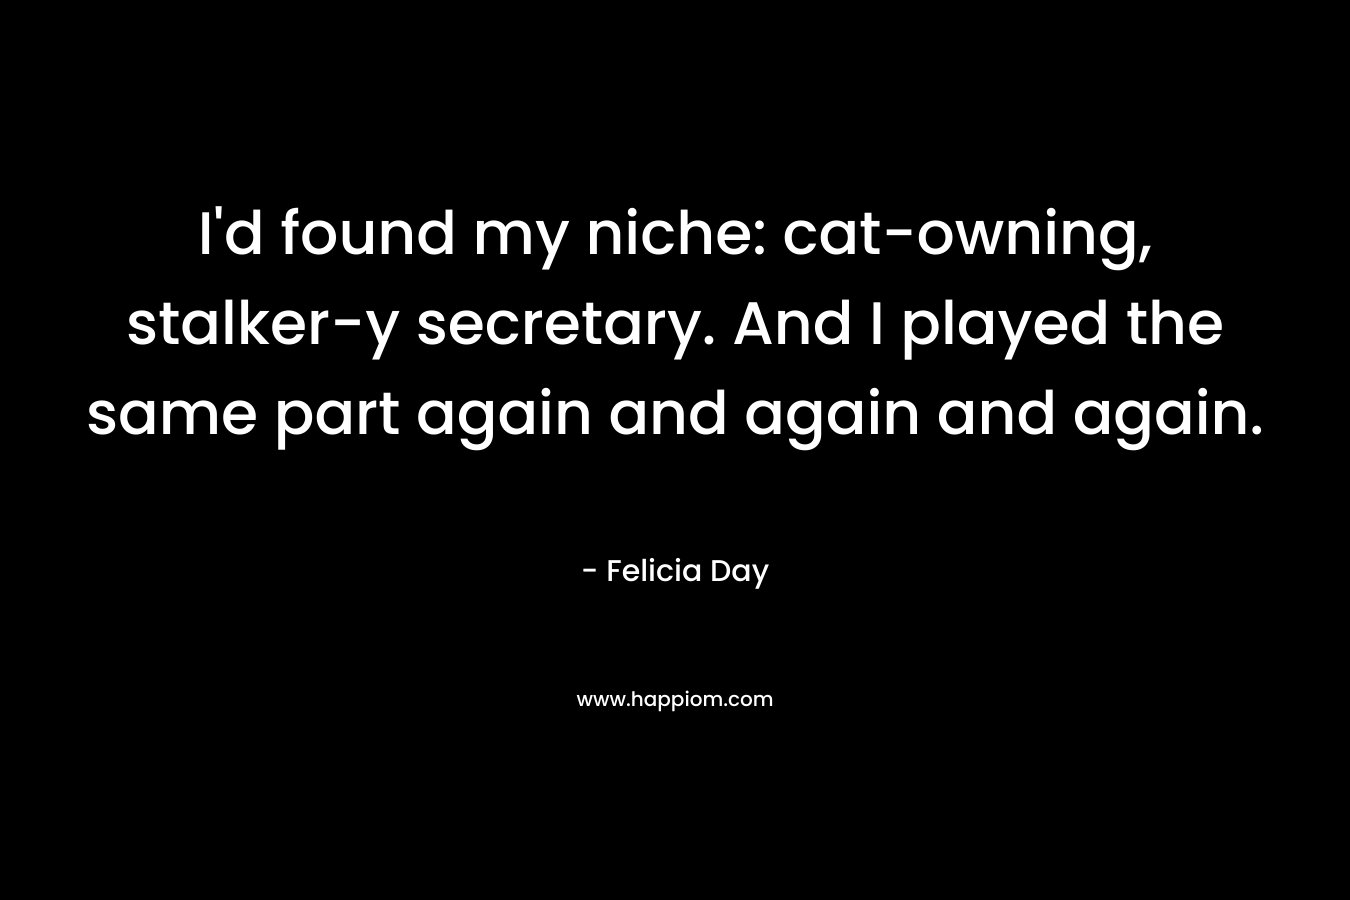 I’d found my niche: cat-owning, stalker-y secretary. And I played the same part again and again and again. – Felicia Day